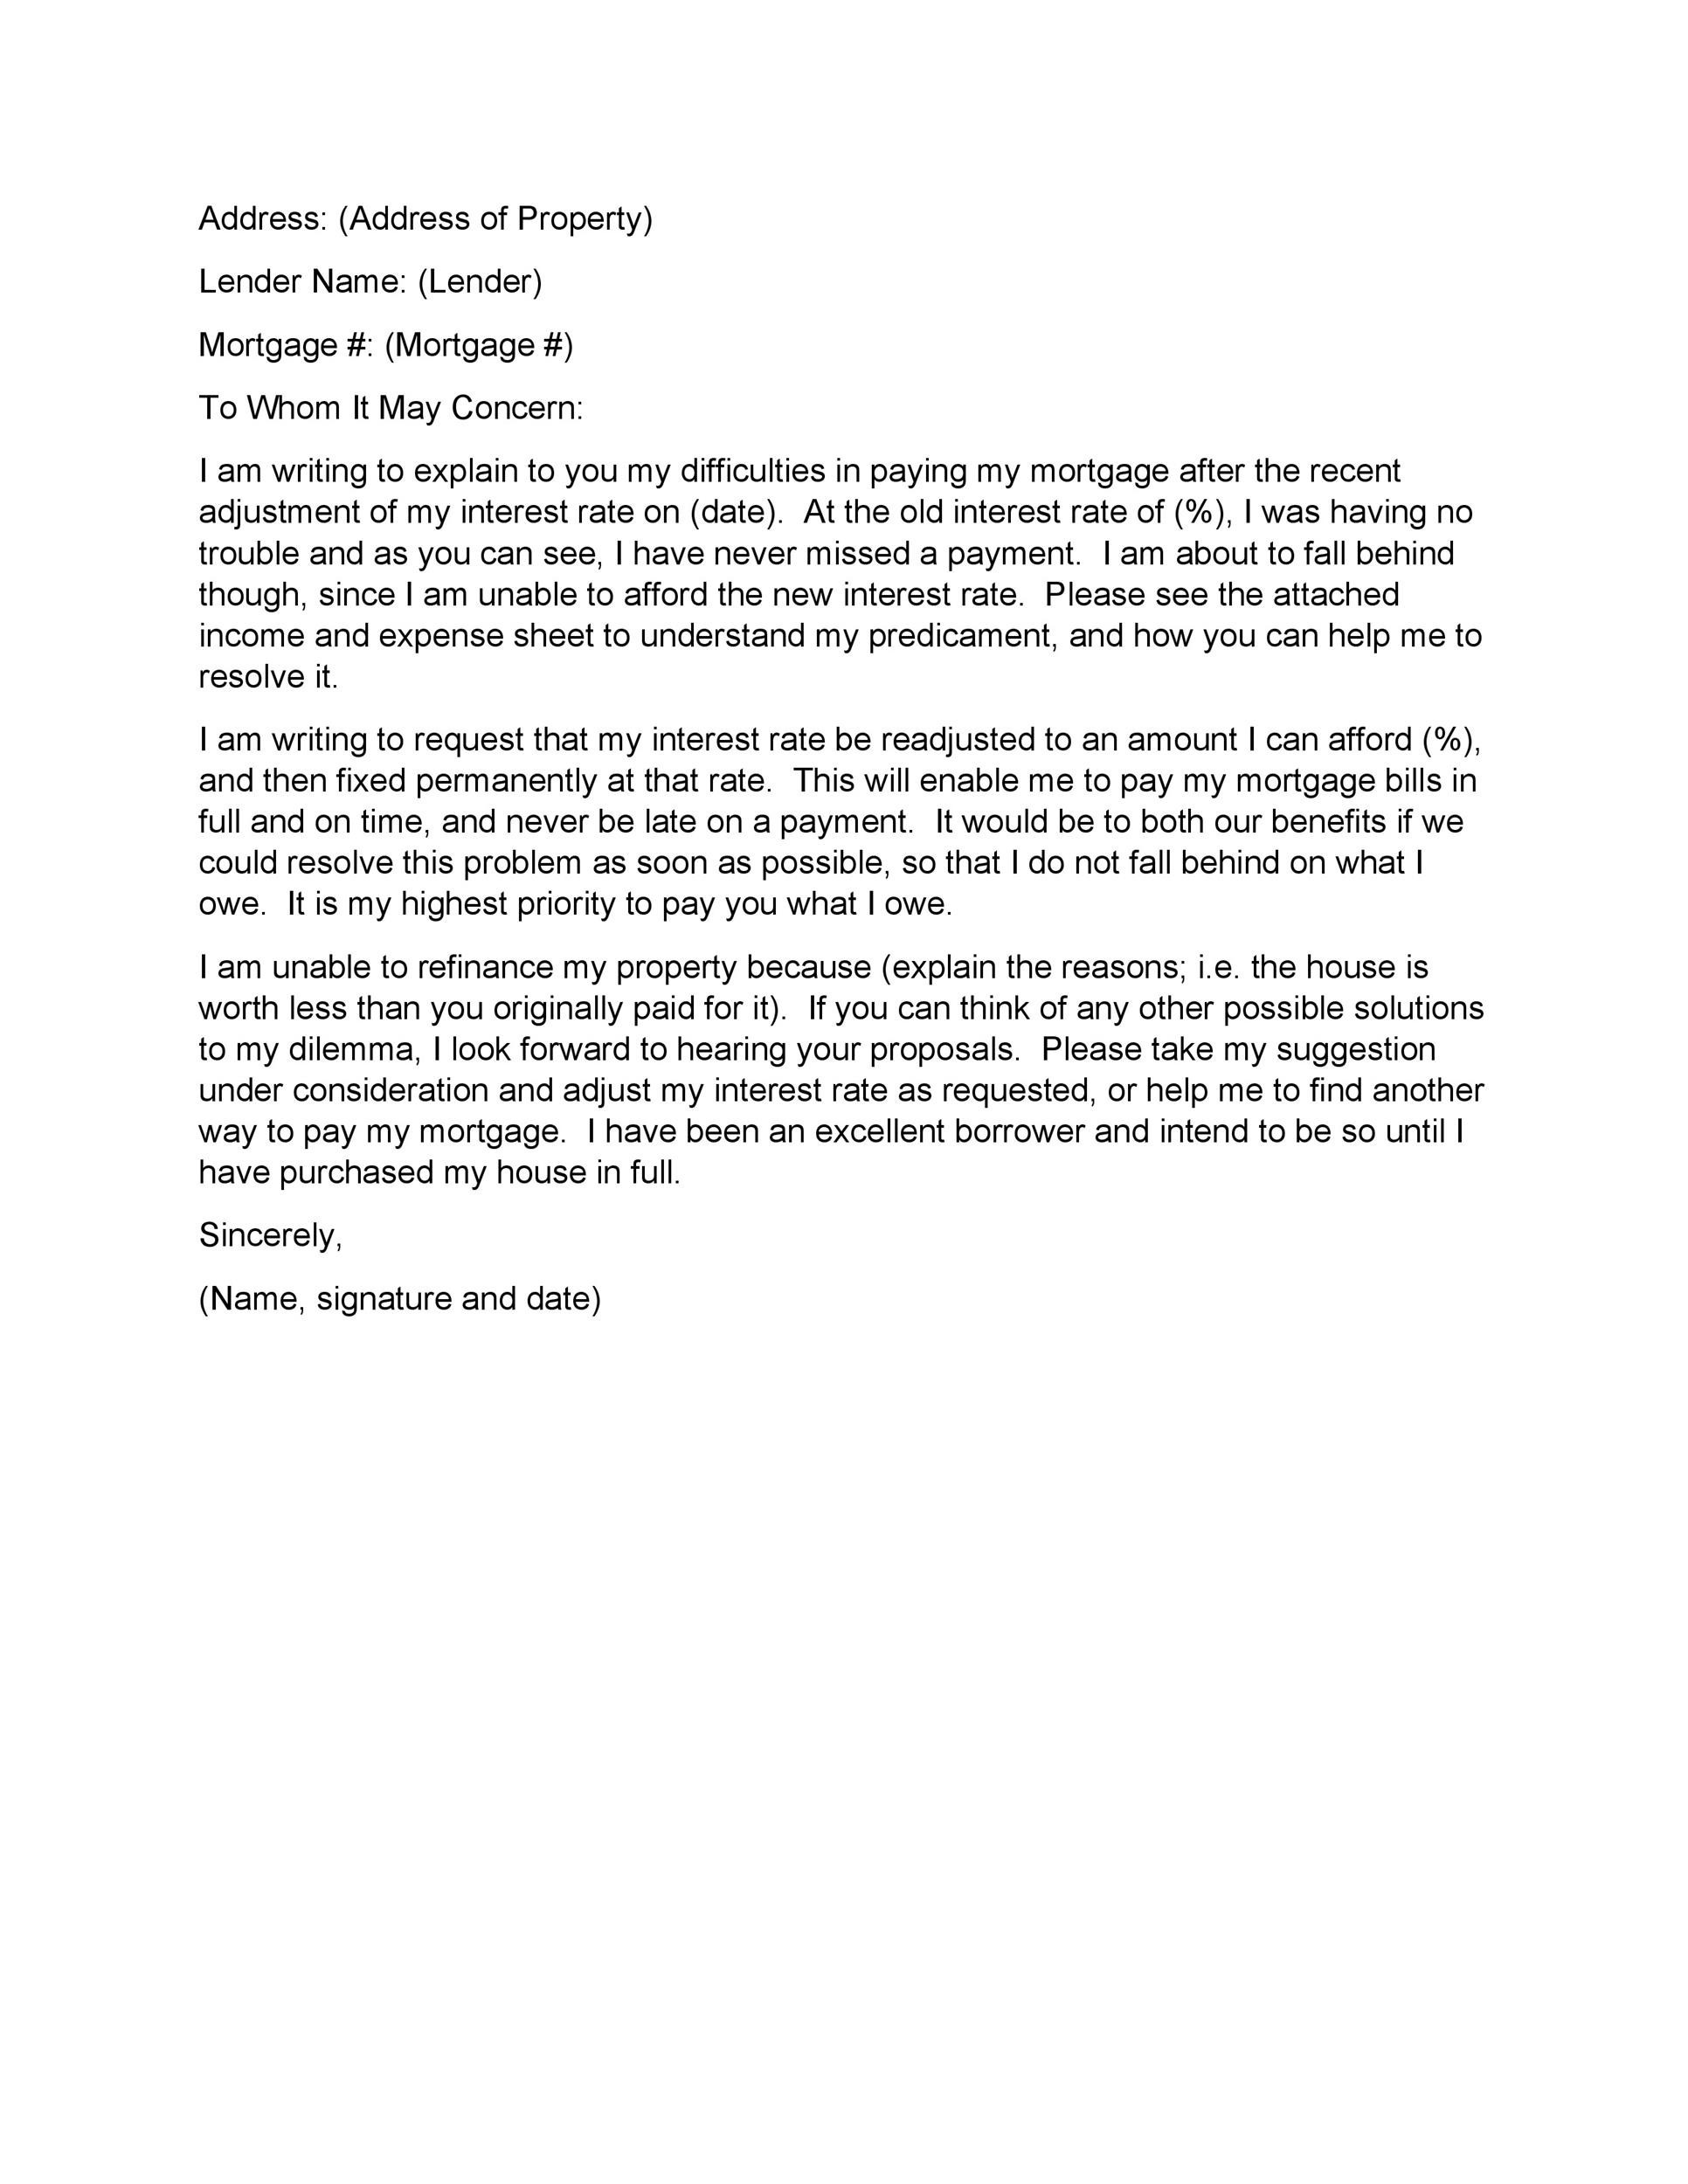 Sample Letter To Homeowner To Buy Their House from templatelab.com